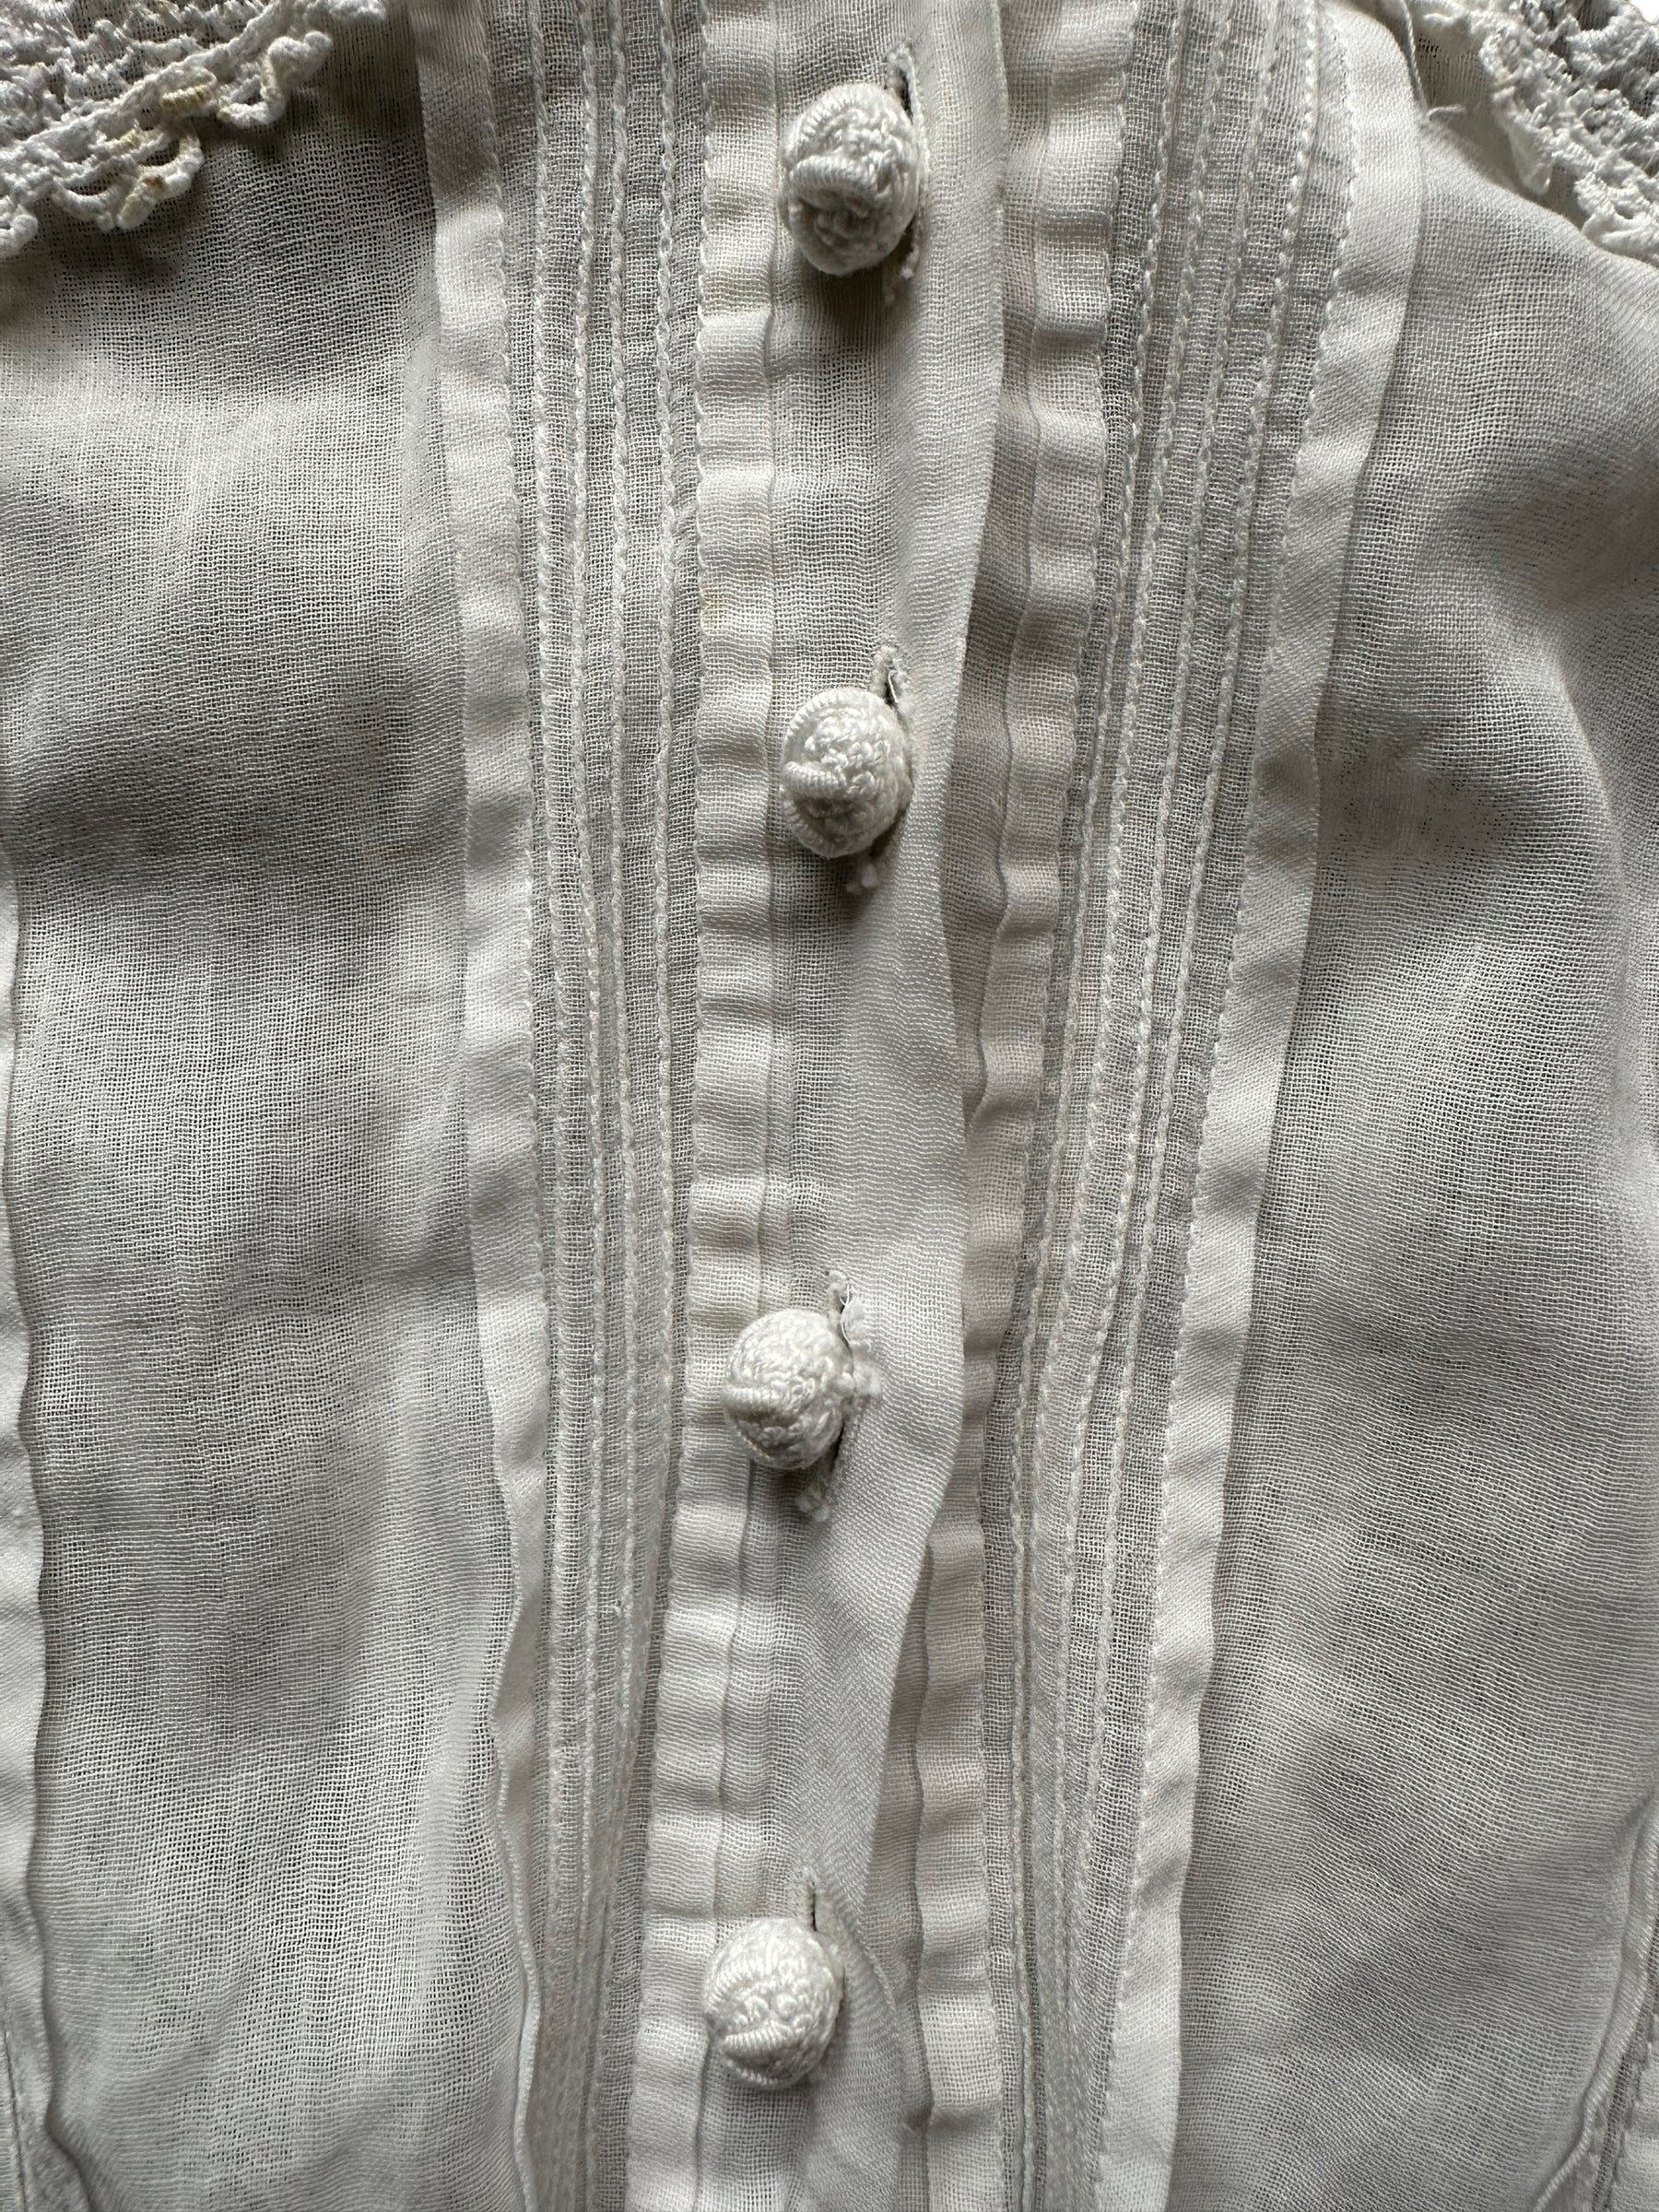 Button close up Early 1900's Edwardian Blouse | Seattle True Vintage | Barn Owl Ladies Clothing